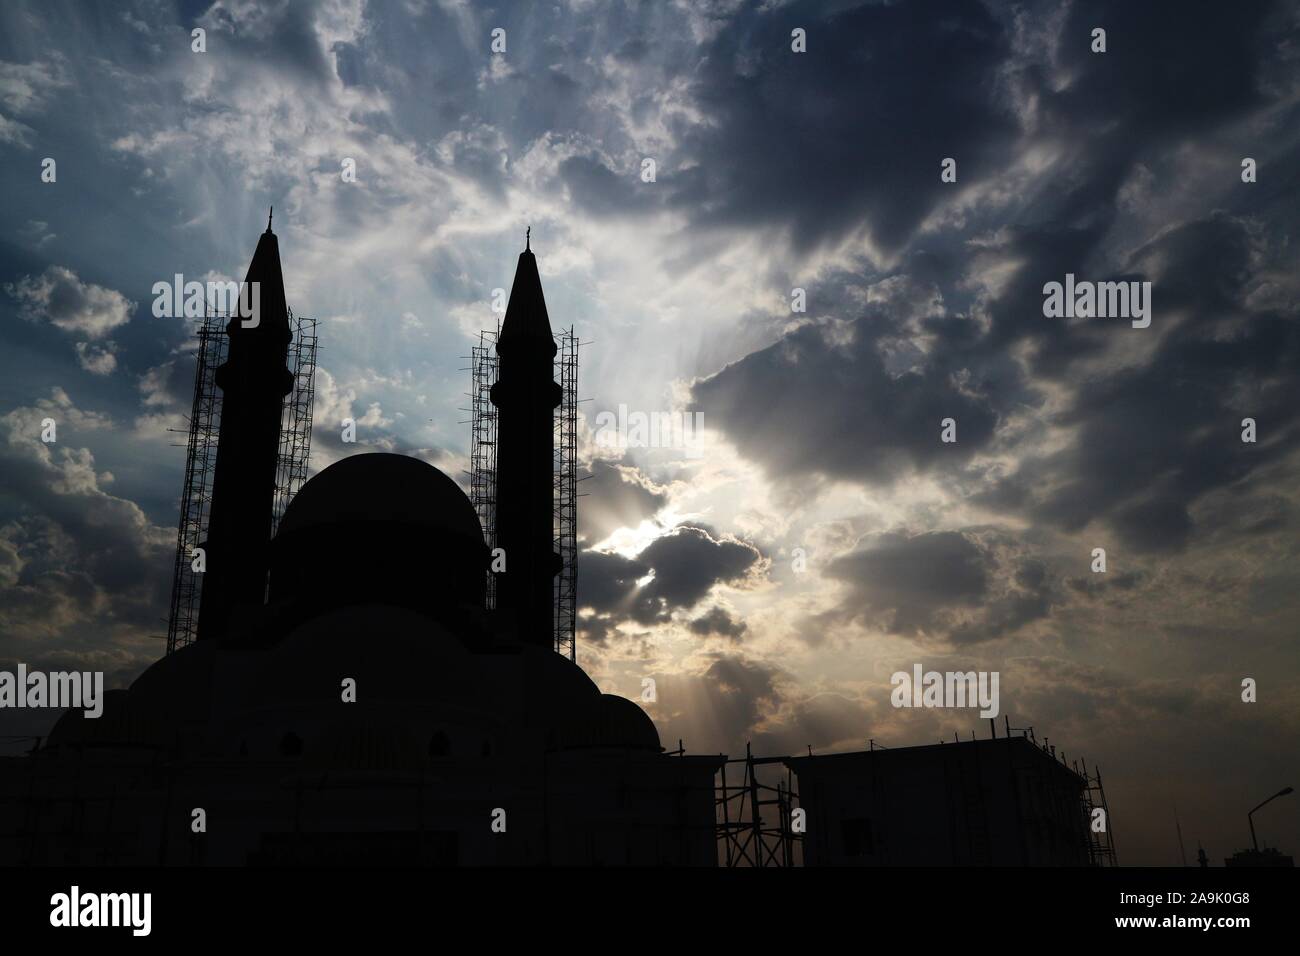 Kuwait City/Kuwait - 10/10/2019: Mosque under construction with minarets in scaffolding silhouetted against a cloudy sky Stock Photo